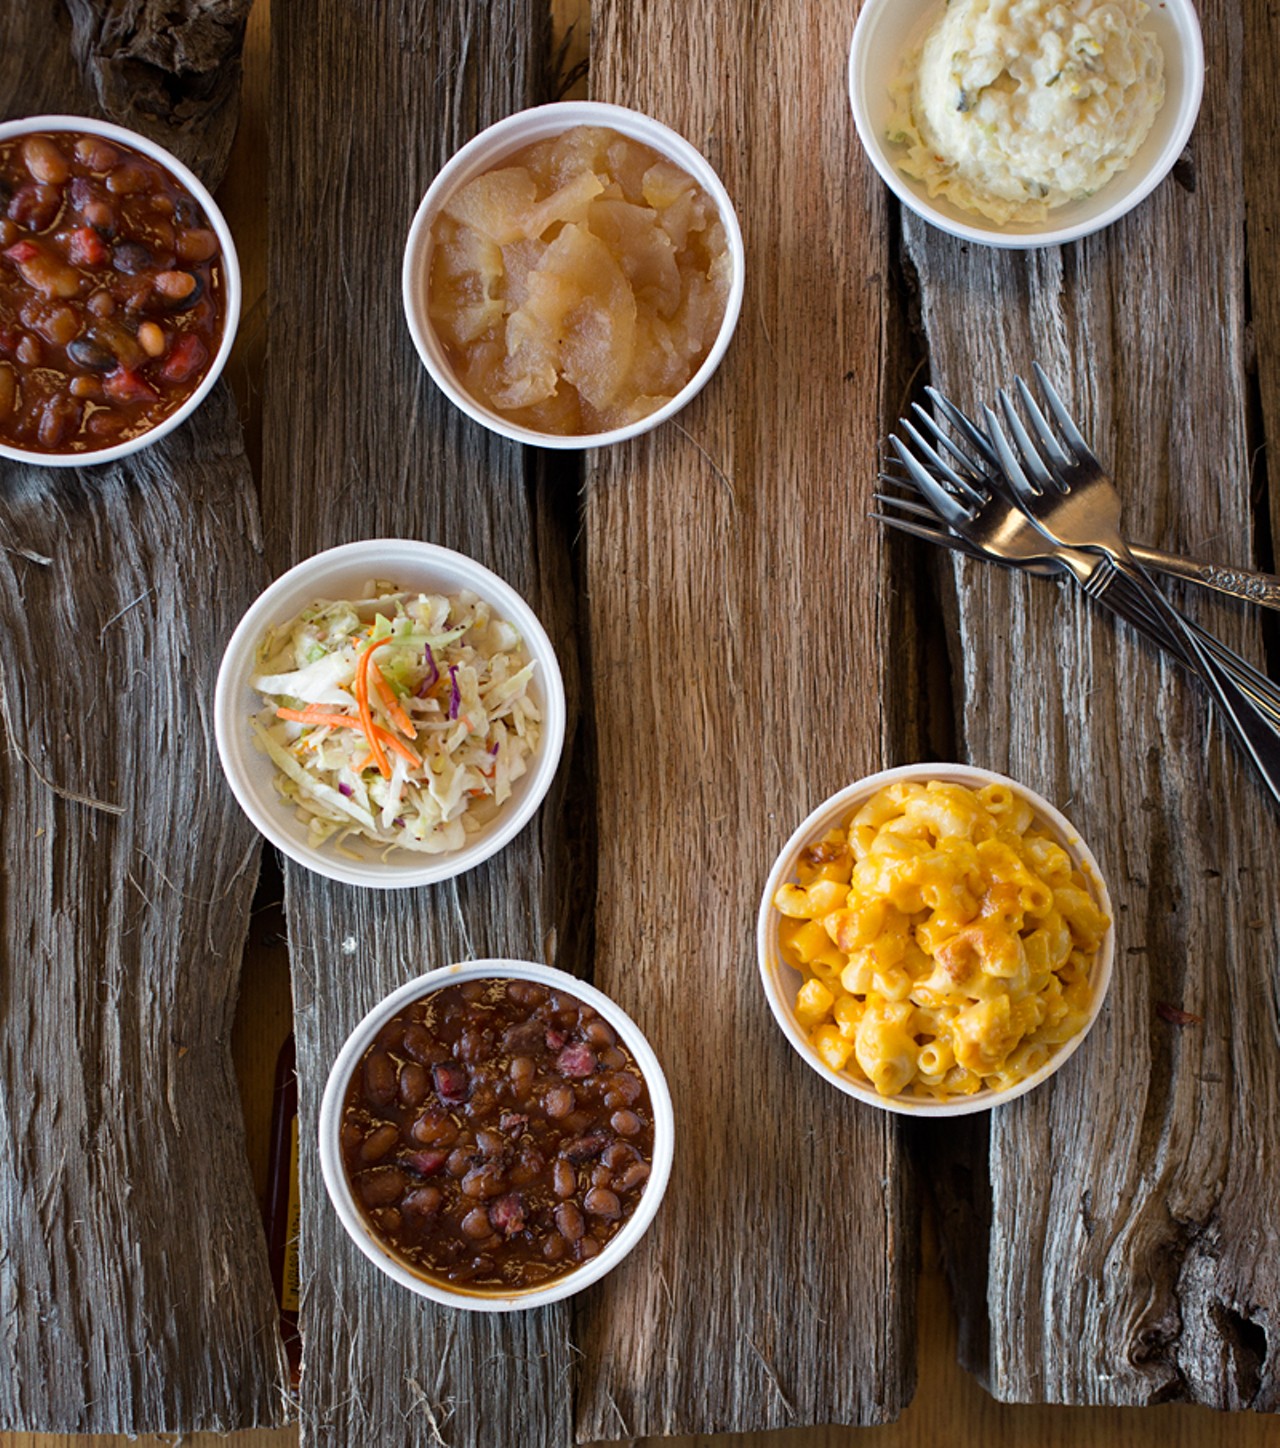 Sides from top left: baked beans, warm apple sauce, baked-potato salad, mac & cheese, sweet brisket beans and crispy cole slaw.